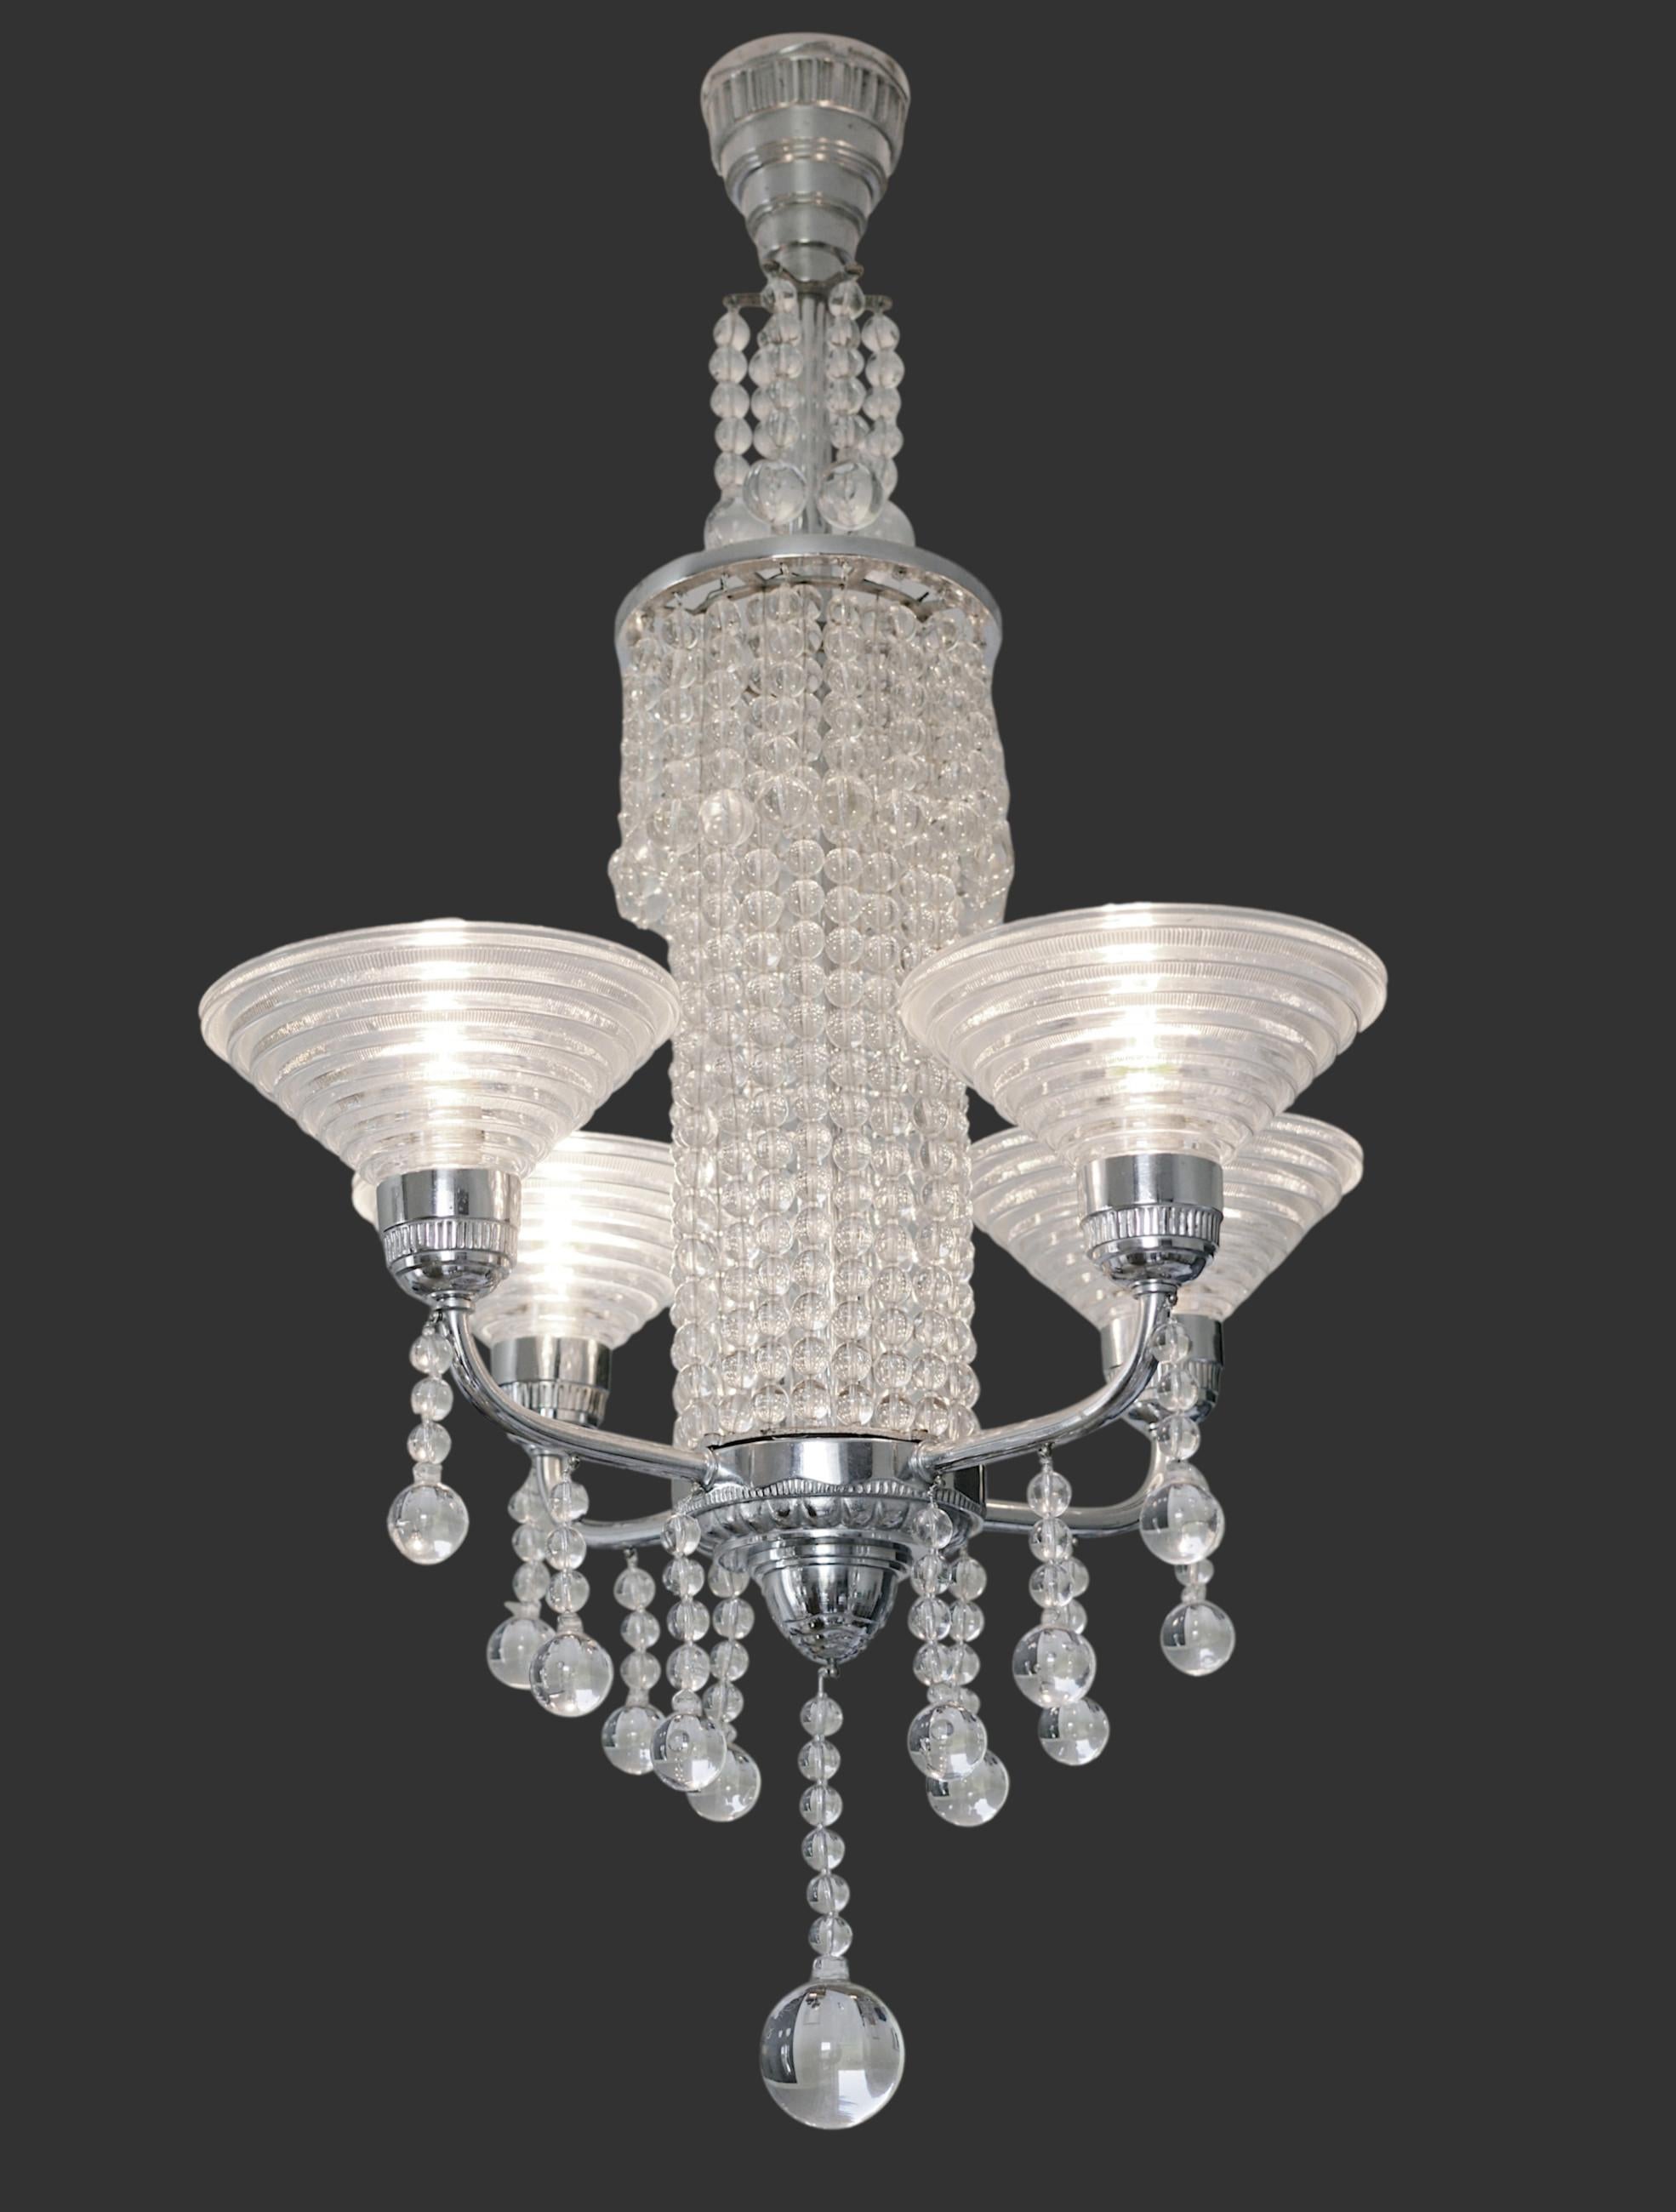 French Art Deco chandelier by Georges LELEU, 53, rue Faubourg Saint-Antoine, 11e,  France, 1920s. Chromed nickel and glass. This chandelier is referenced V.4107 and titled 